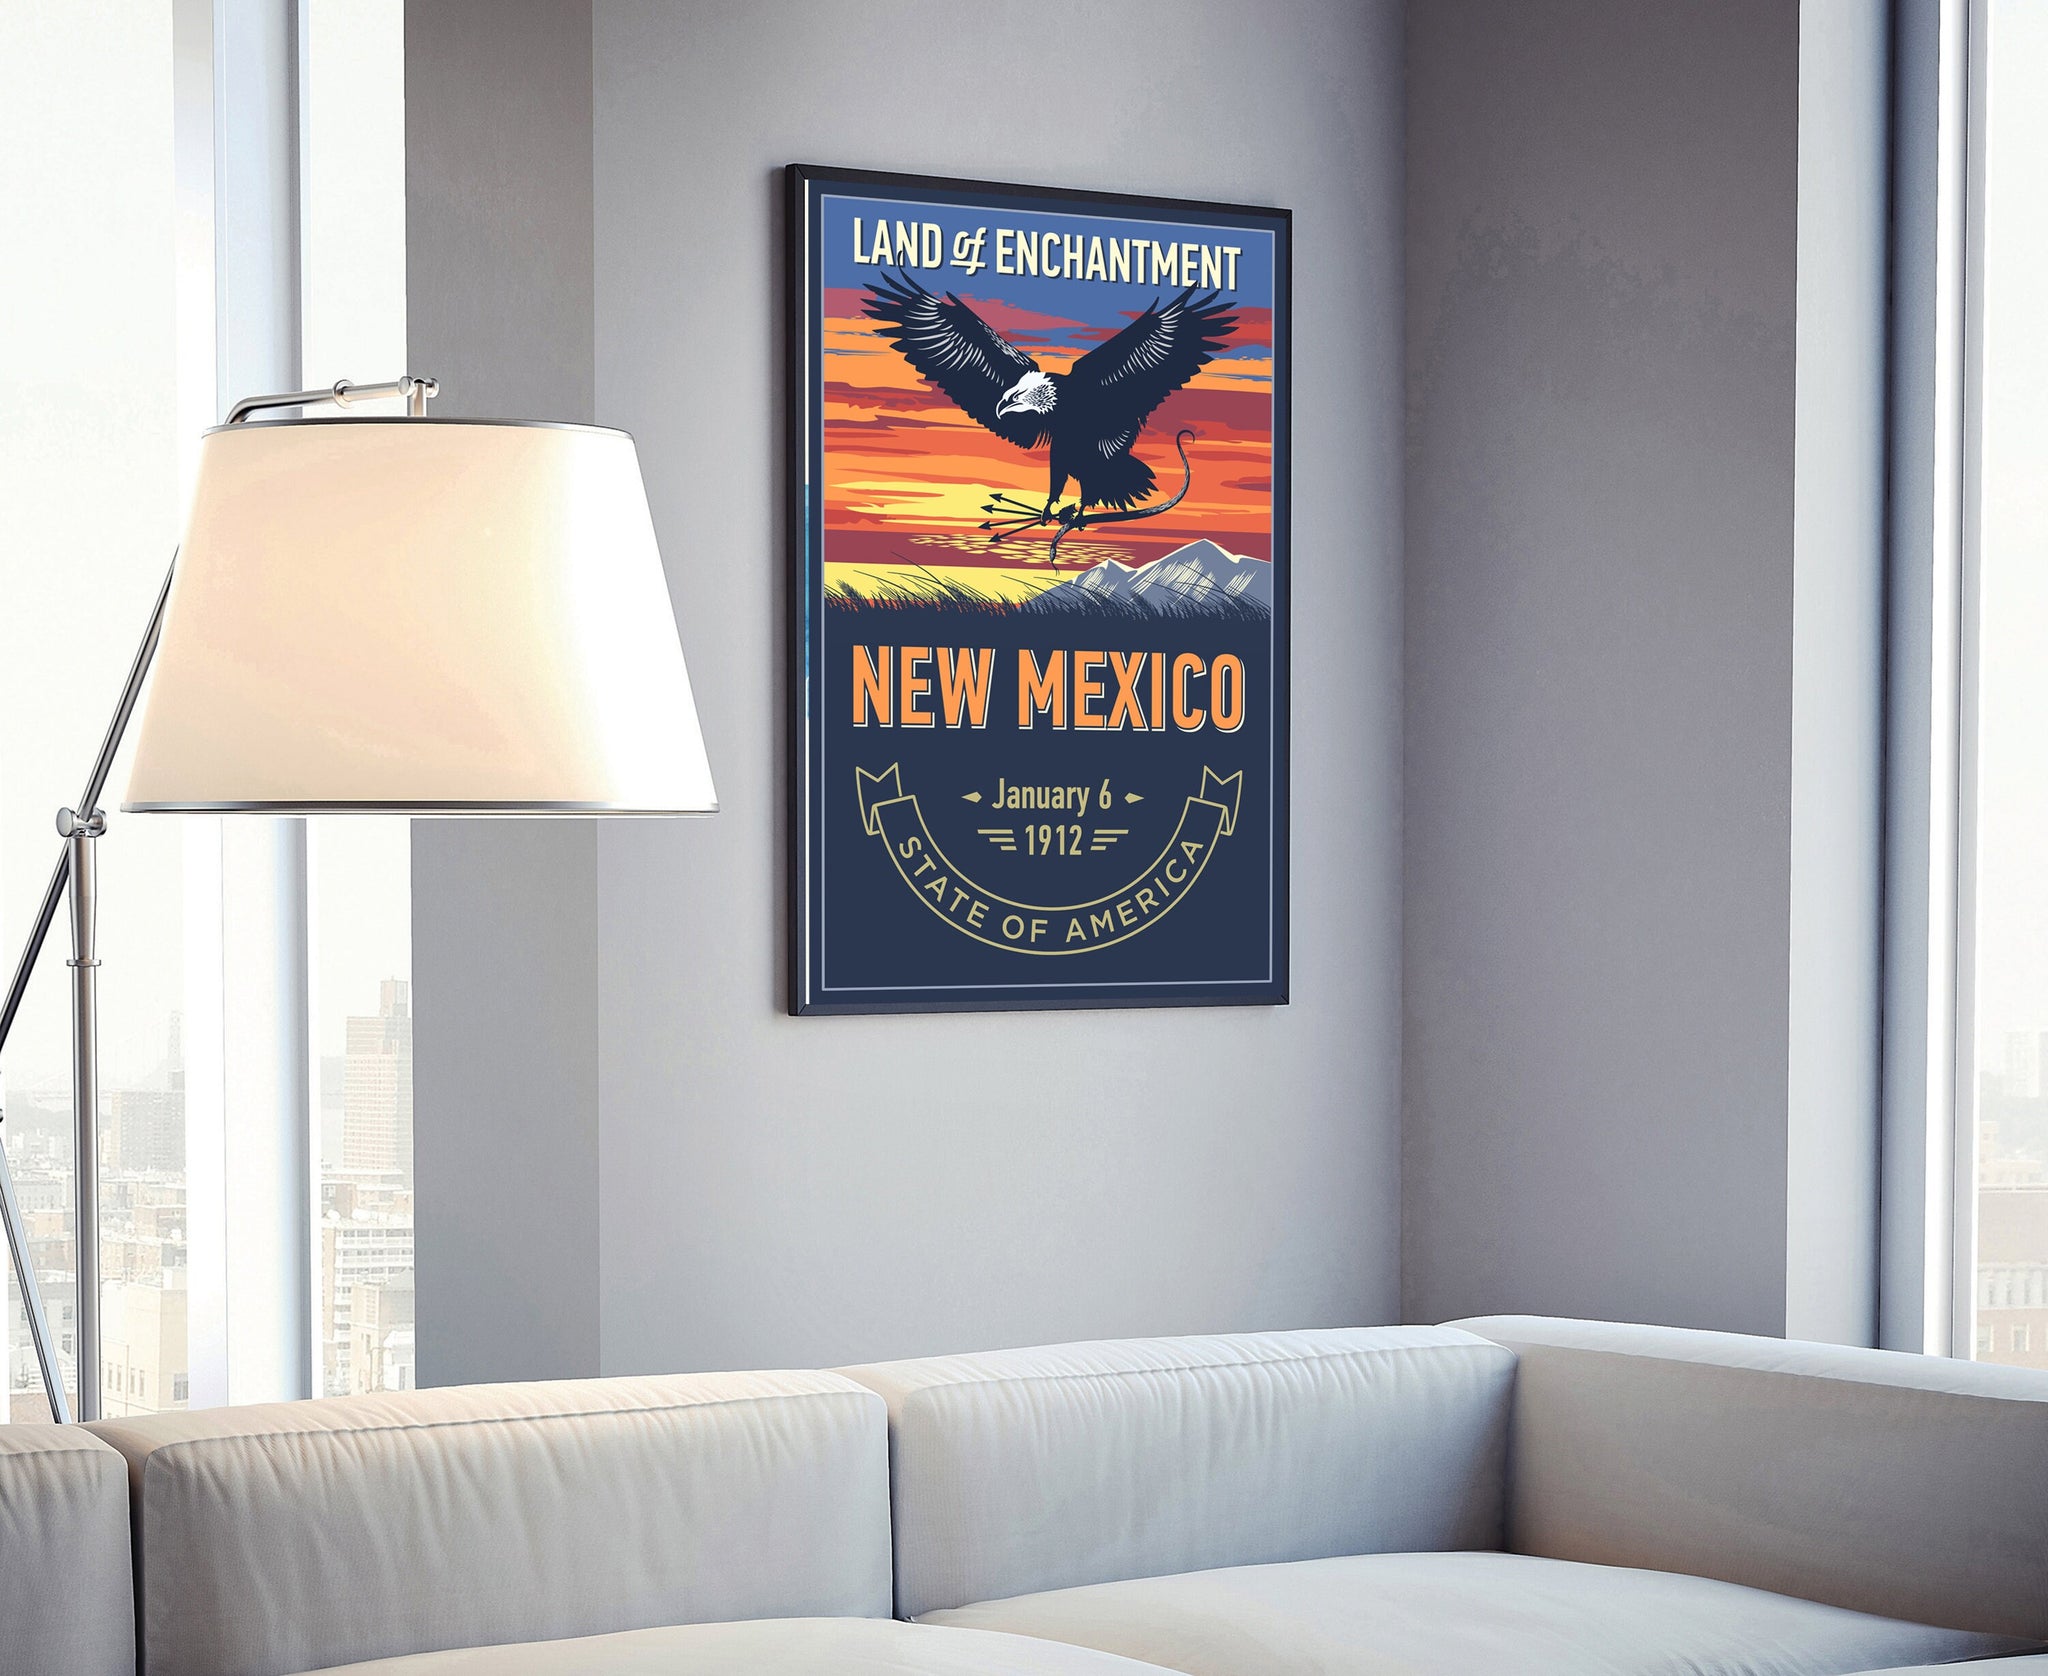 United States Poster, New Mexico State Poster Print, New Mexico State Emblem Poster, Retro Travel State Poster, Home Office Wall Art